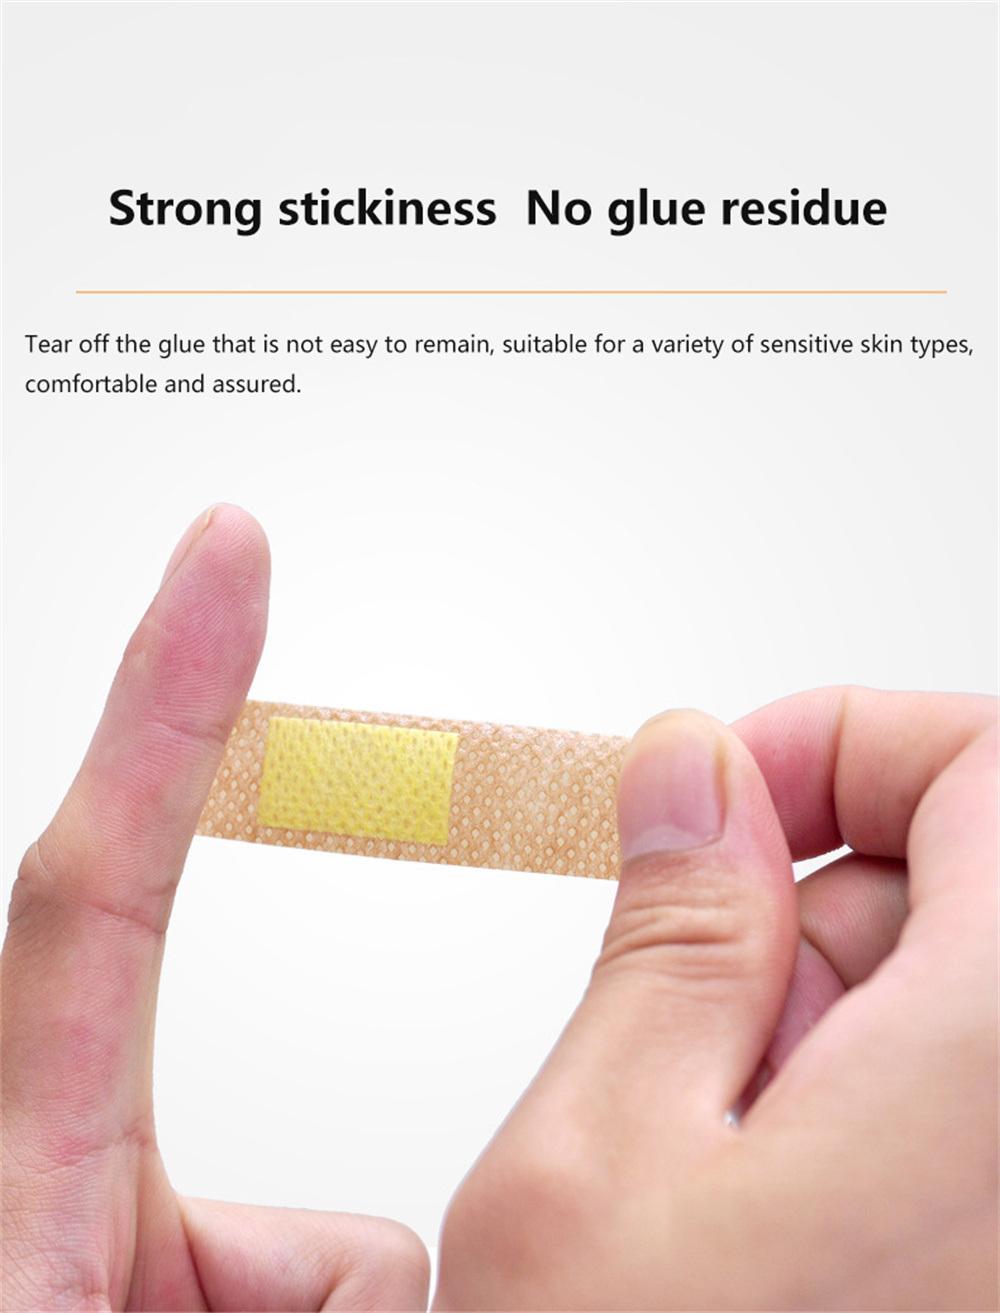 Waterproof Band Aid/Band-Aid/First Aid Small Wound Bandaging